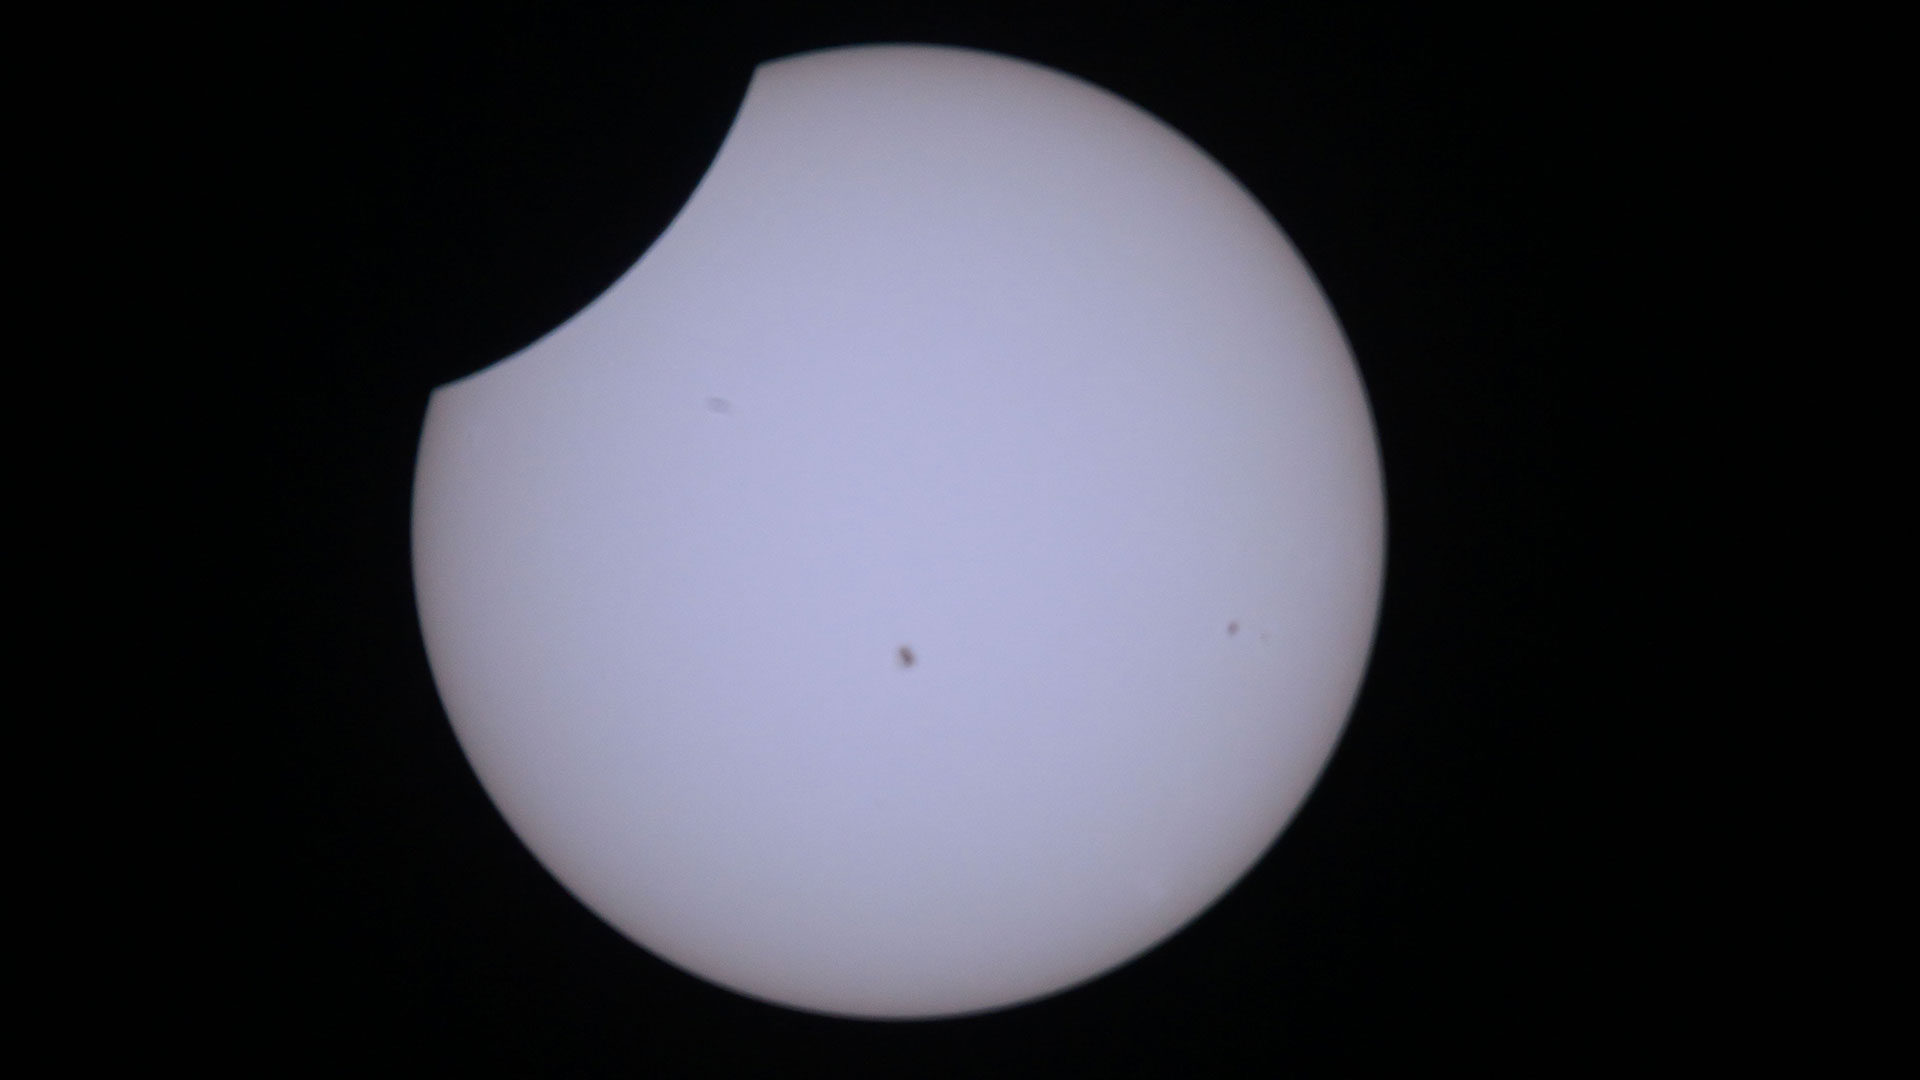 close-up view of the sun, showing the moon blocking out a top-left sliver of the solar disk